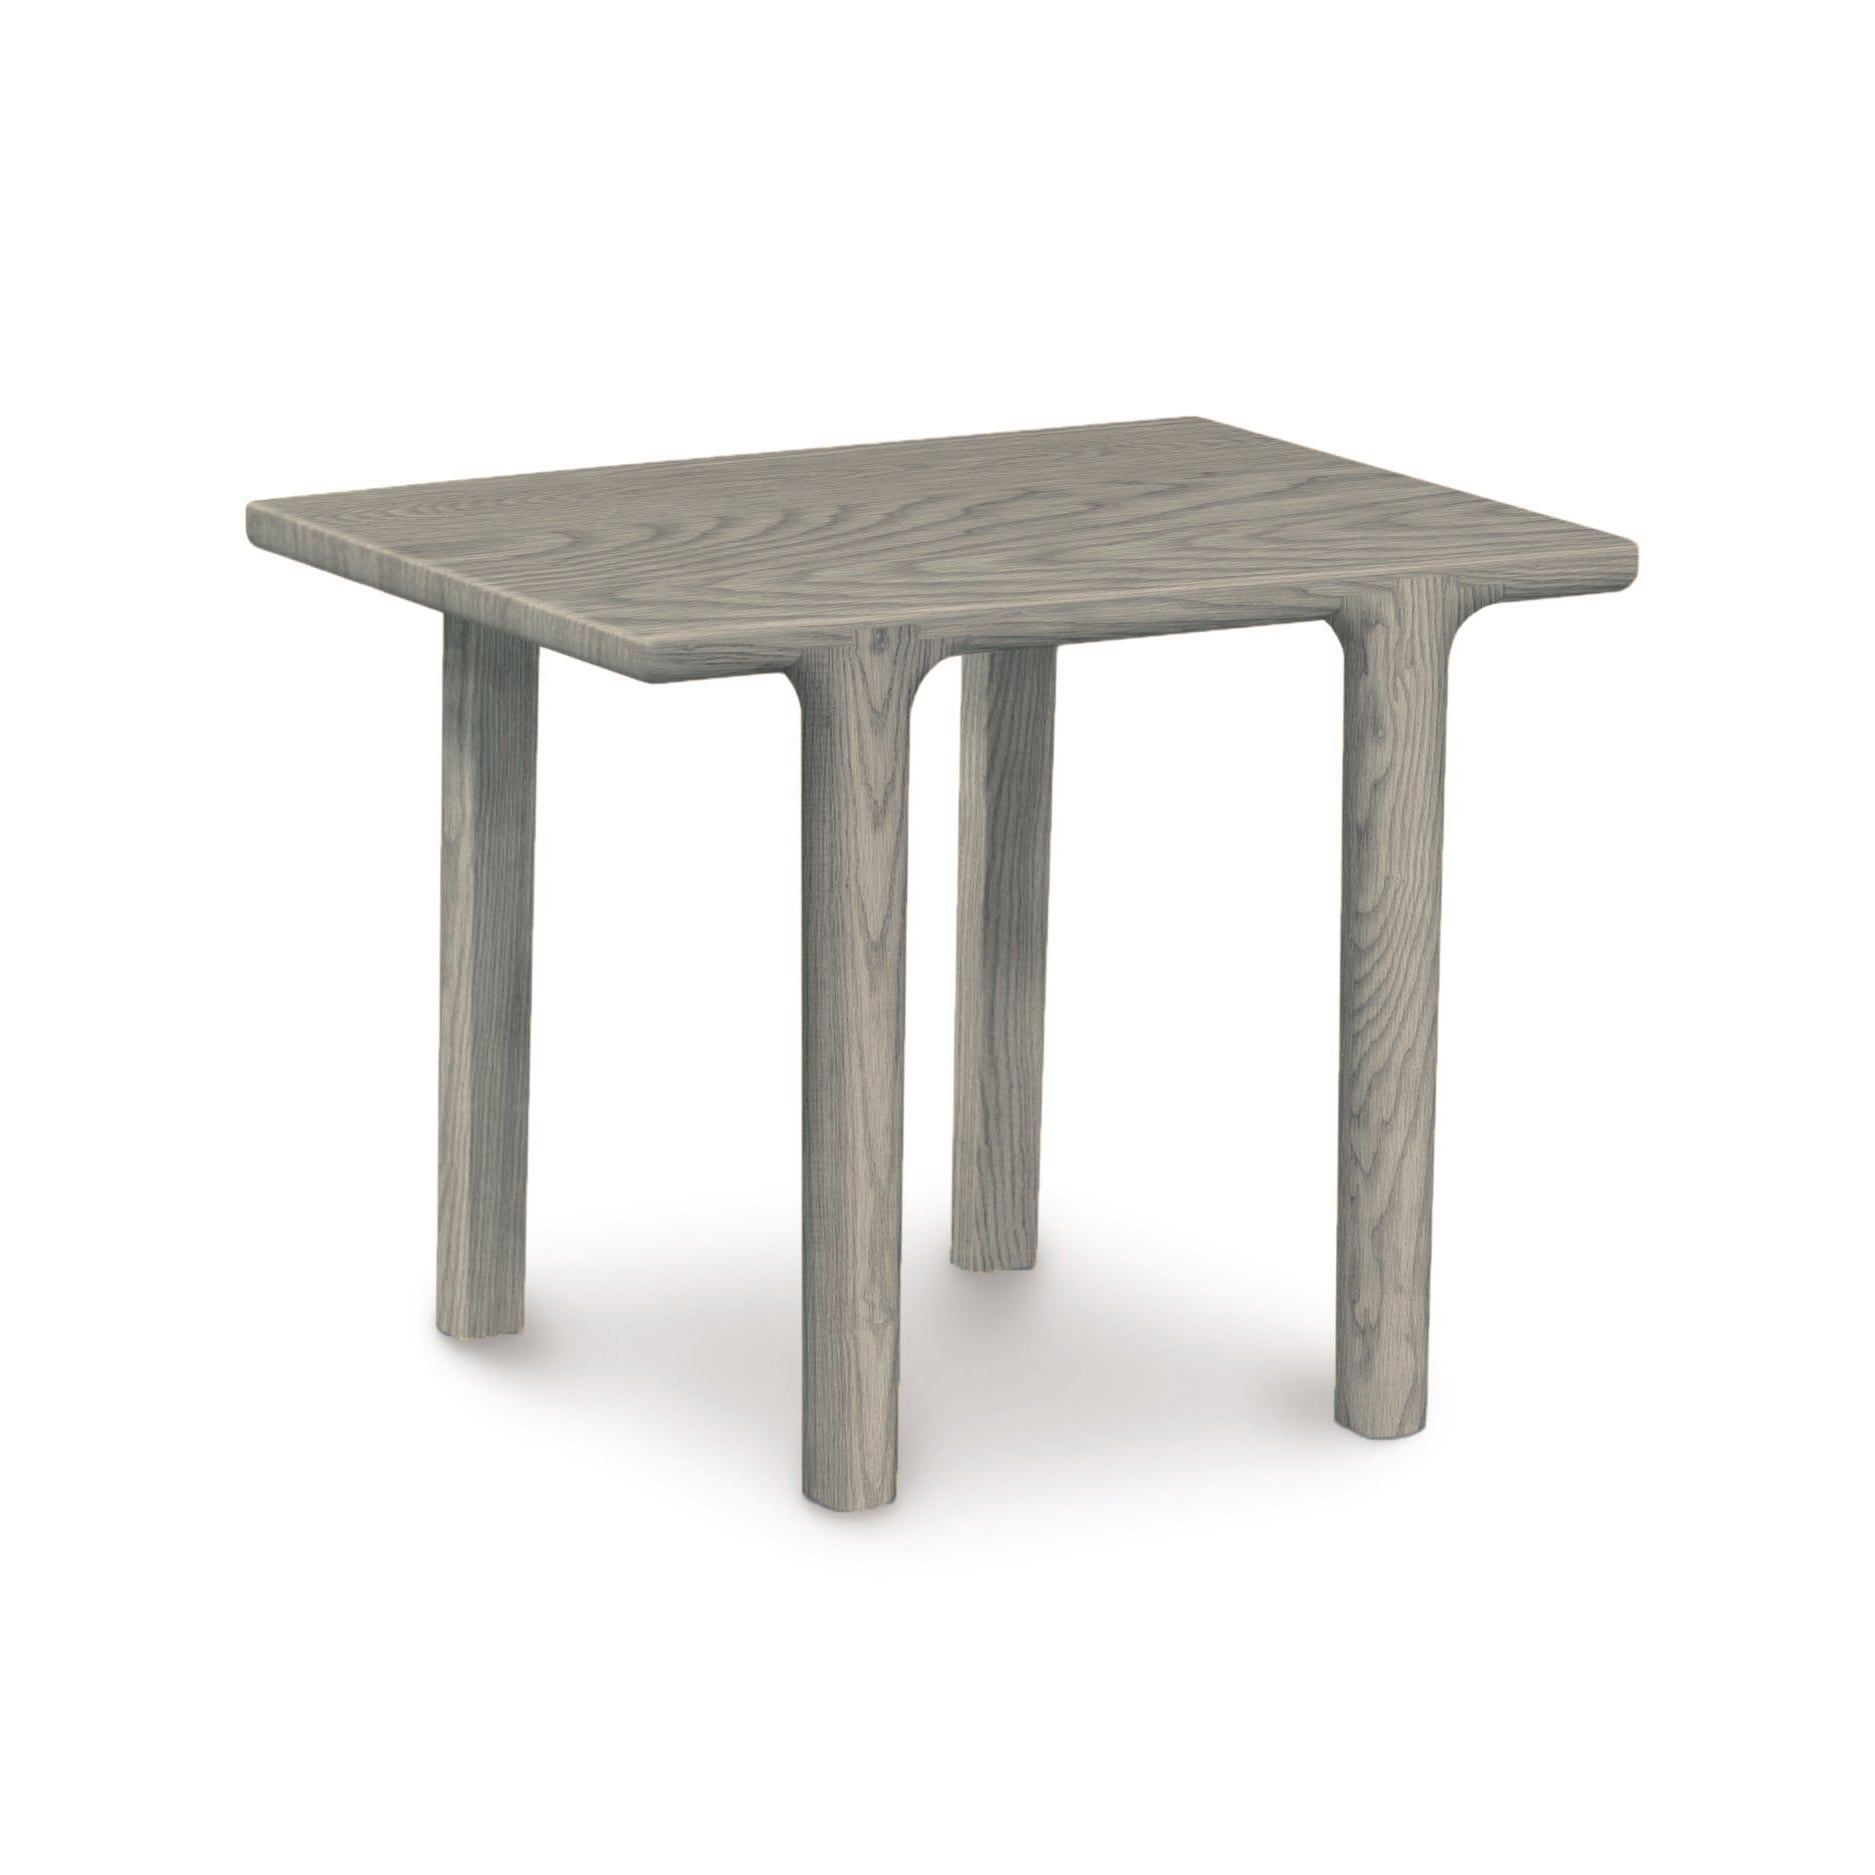 A simple solid Copeland Furniture Sierra Rectangular End Table with four legs on a plain background.